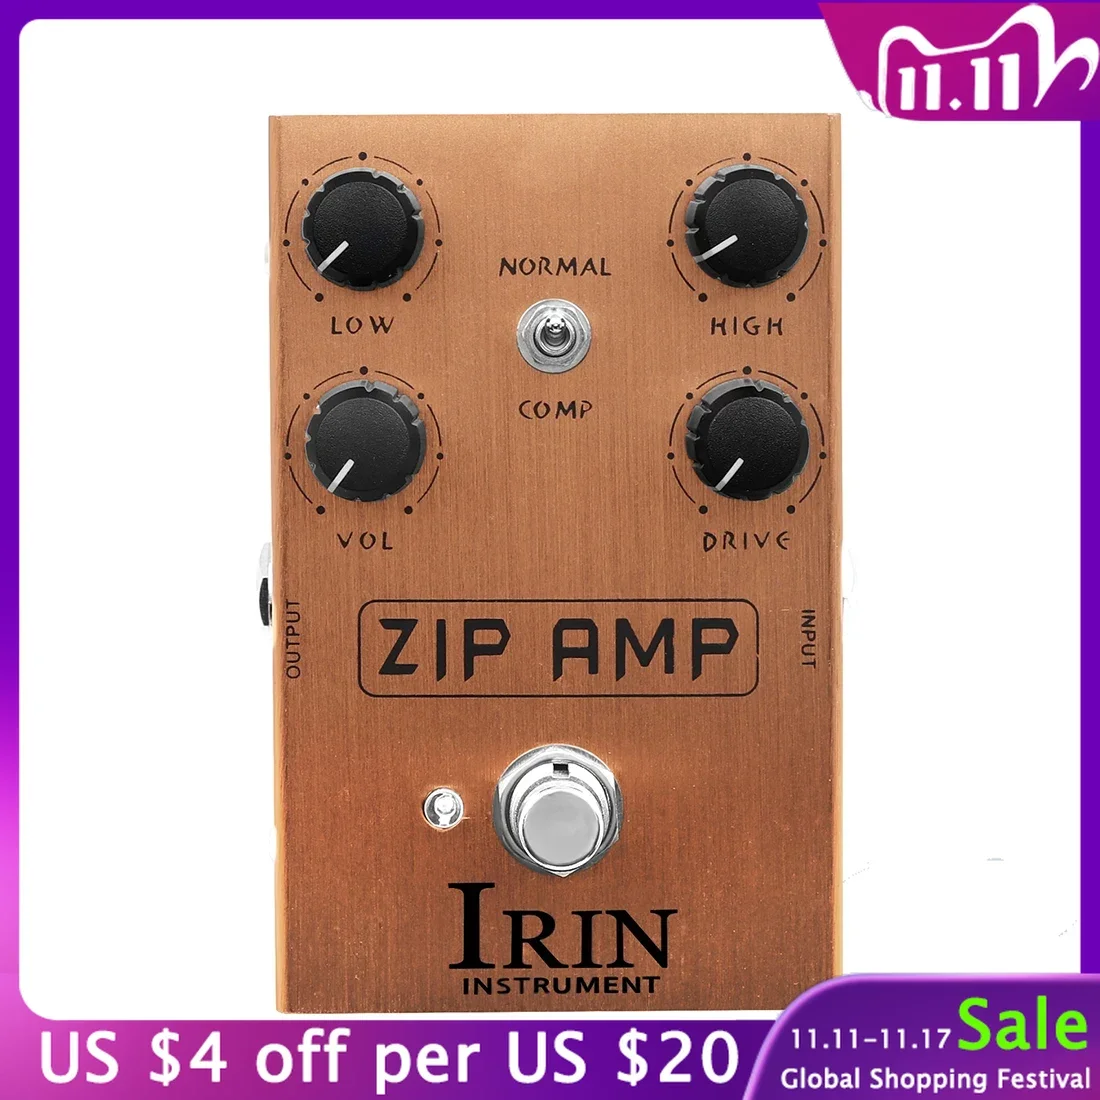 

IRIN ZIP AMP Strong Compression Overdrive Tone Guitar Effects Pedal with COMP Toggle Switch for Electric Guitar Effect Accessory